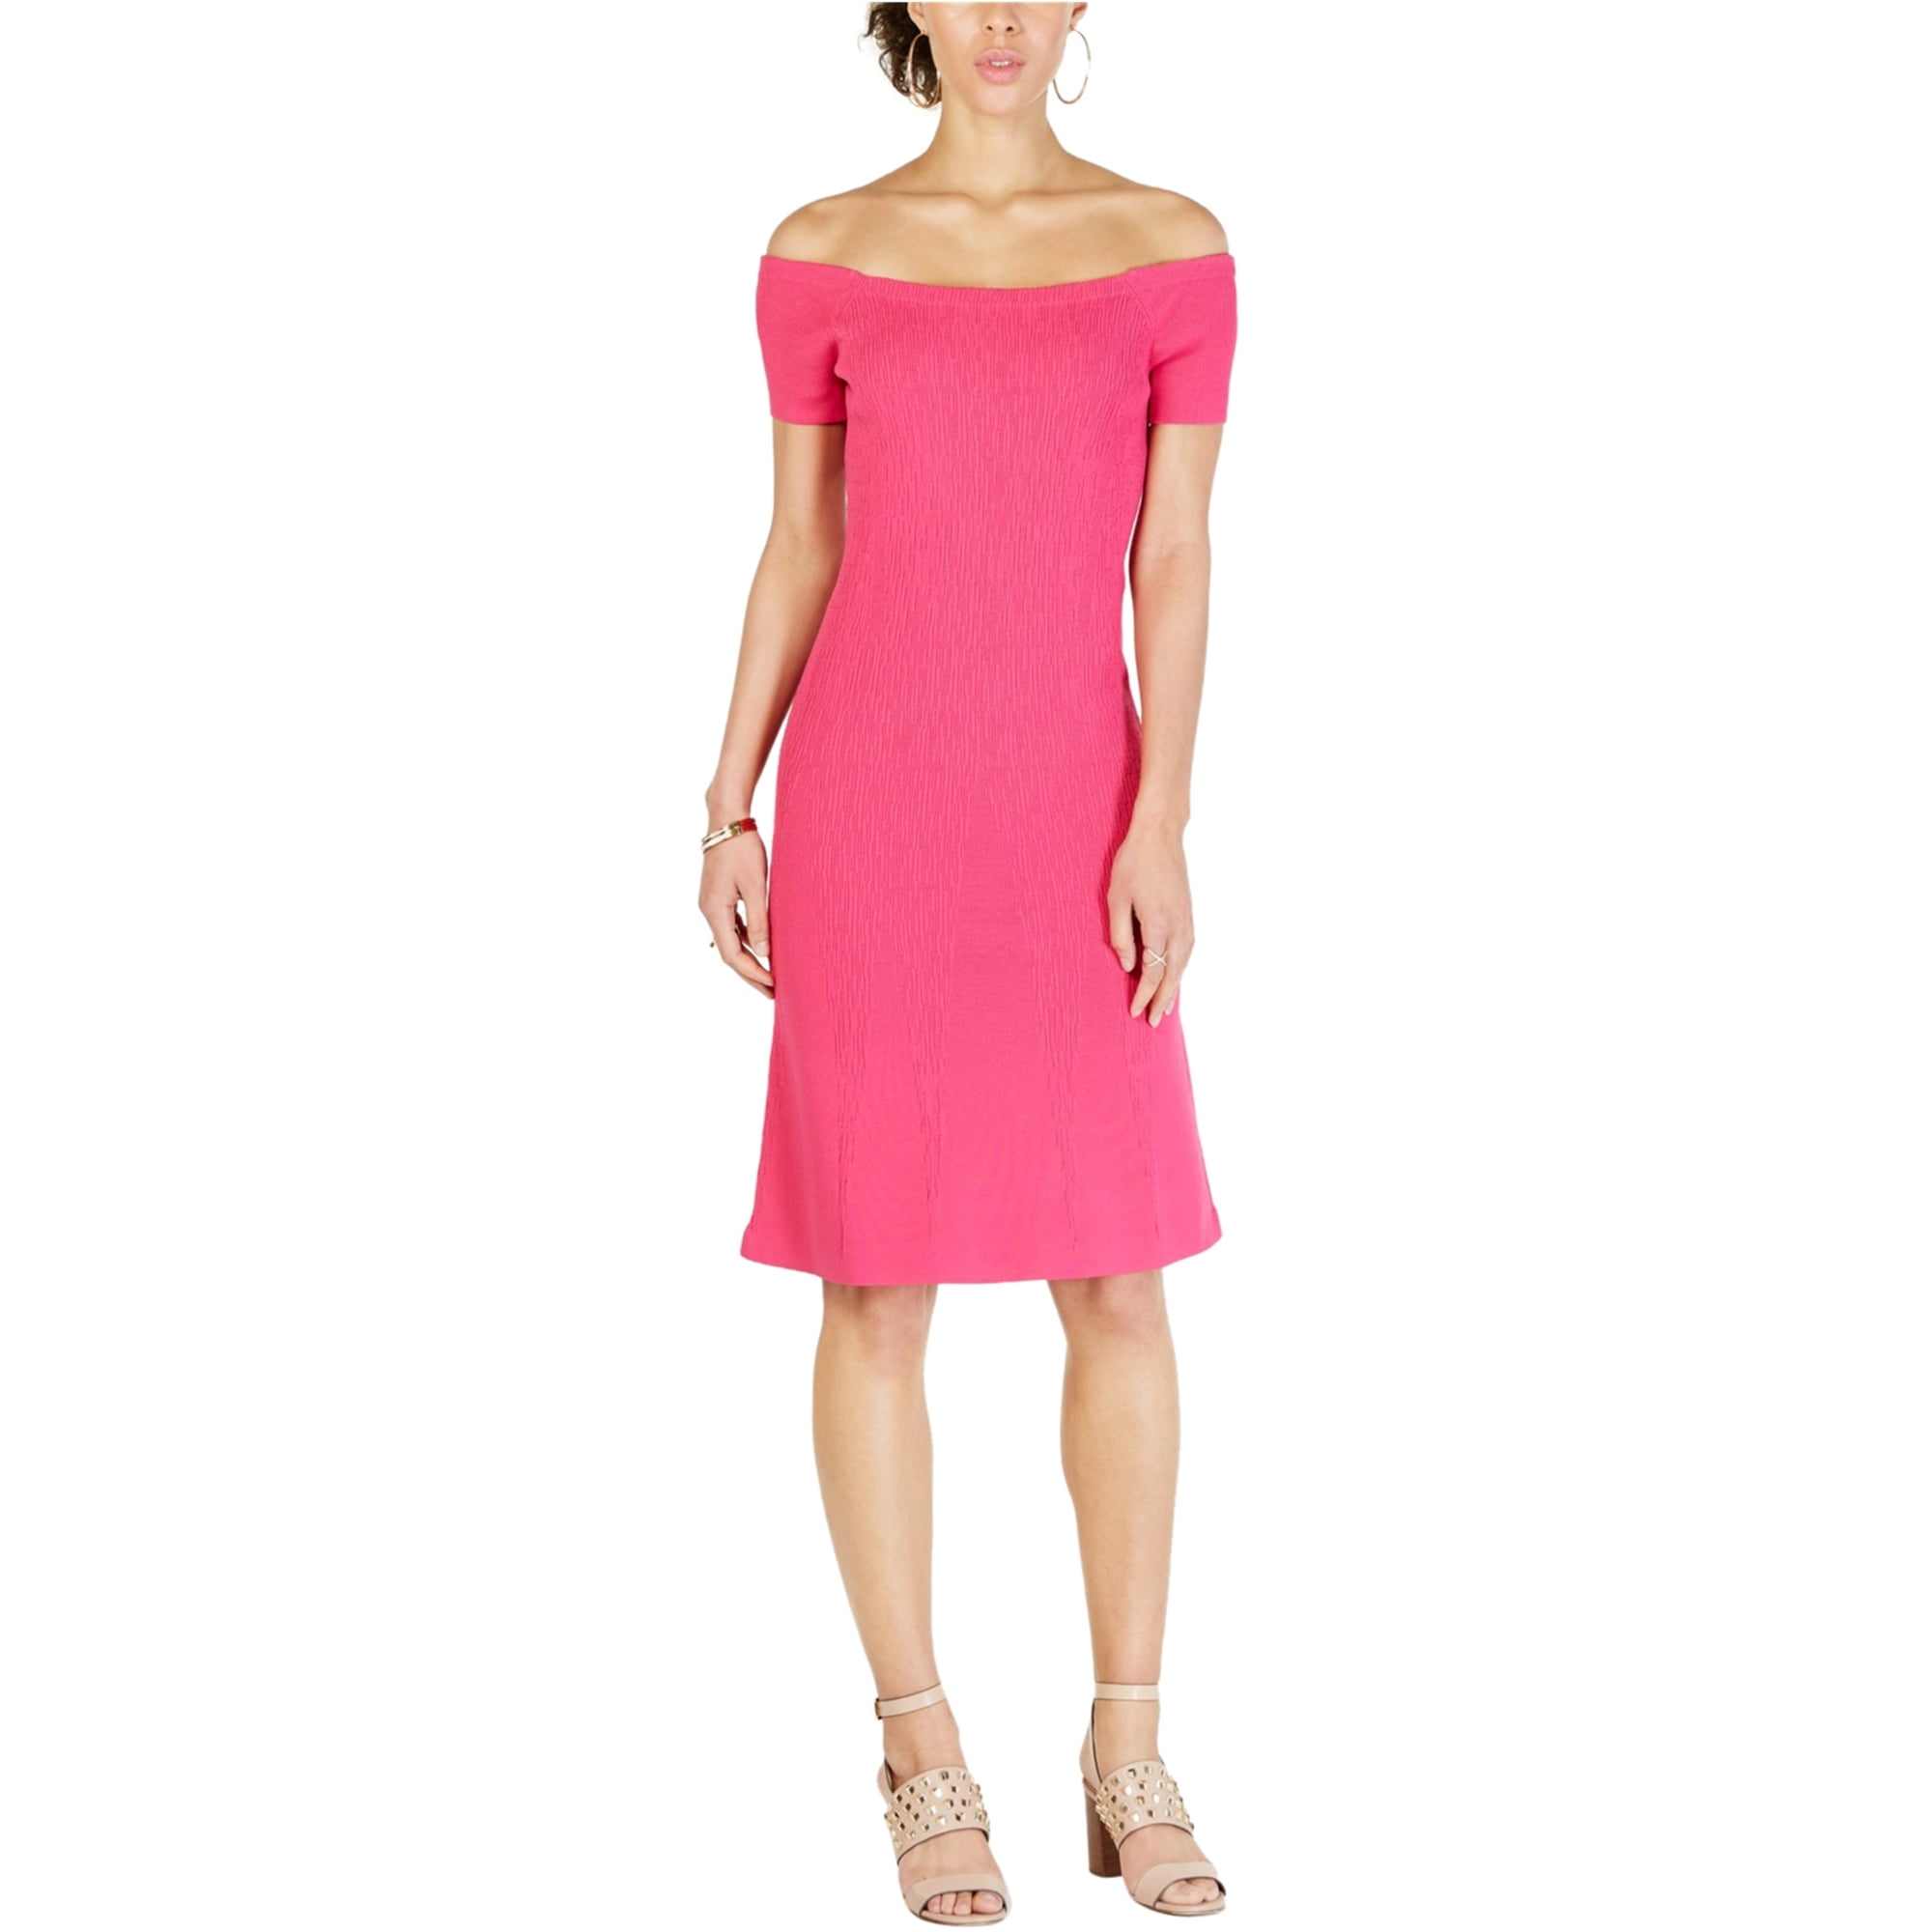 Michael Kors Womens Knit A-line Fit & Flare Pink, X-Large